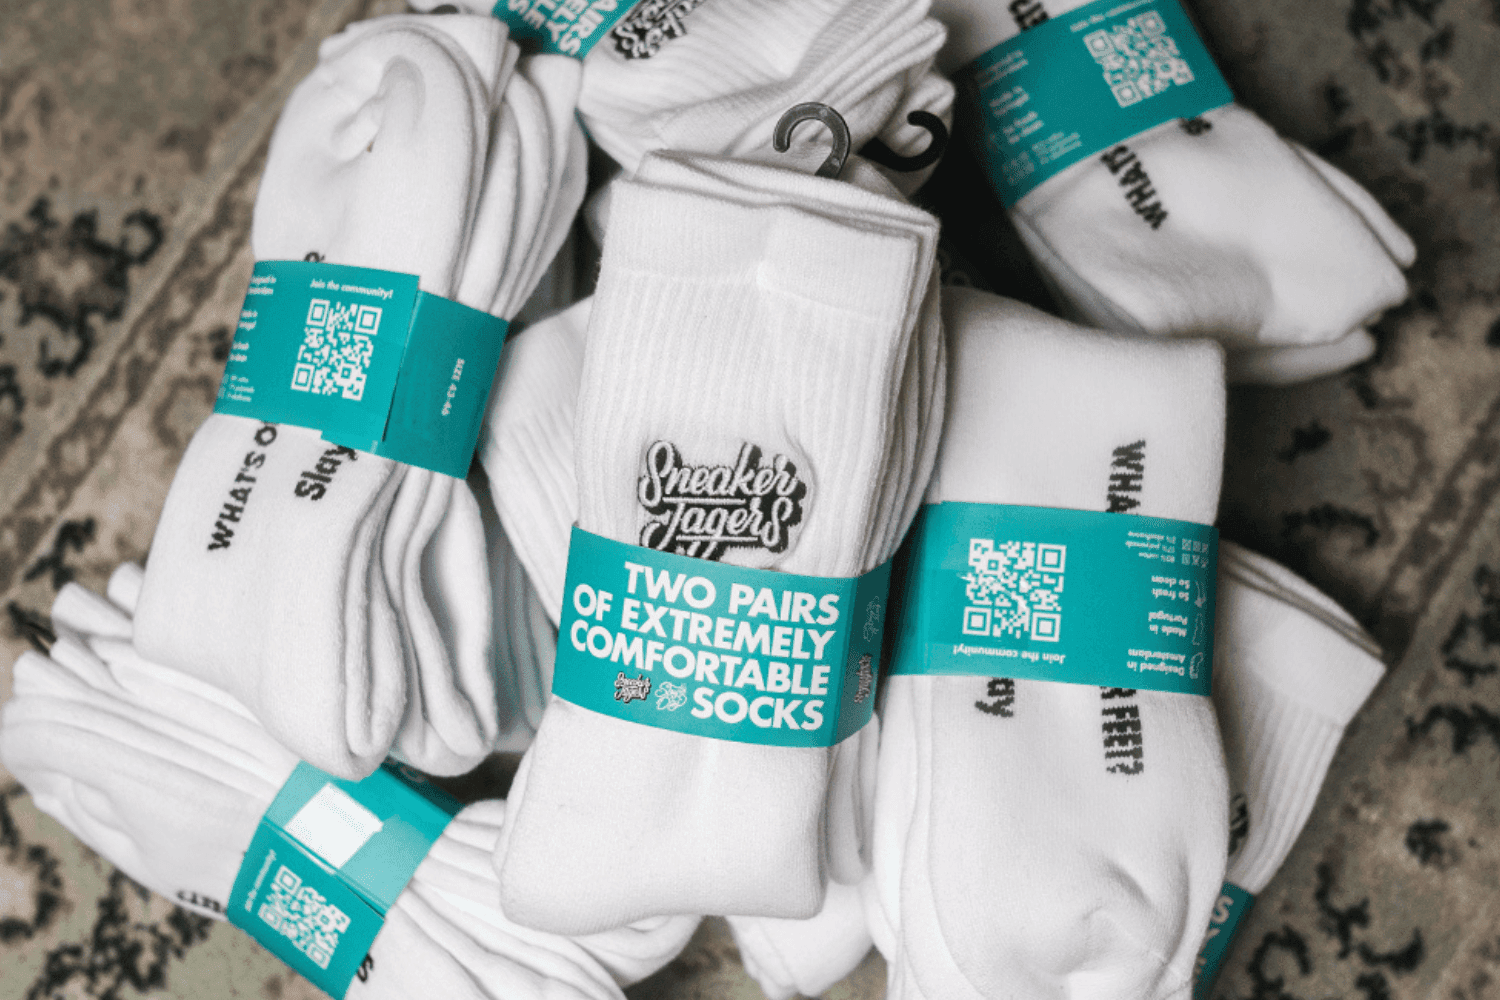 Sneakerjagers present a new two-pack of exclusive socks + giveaway